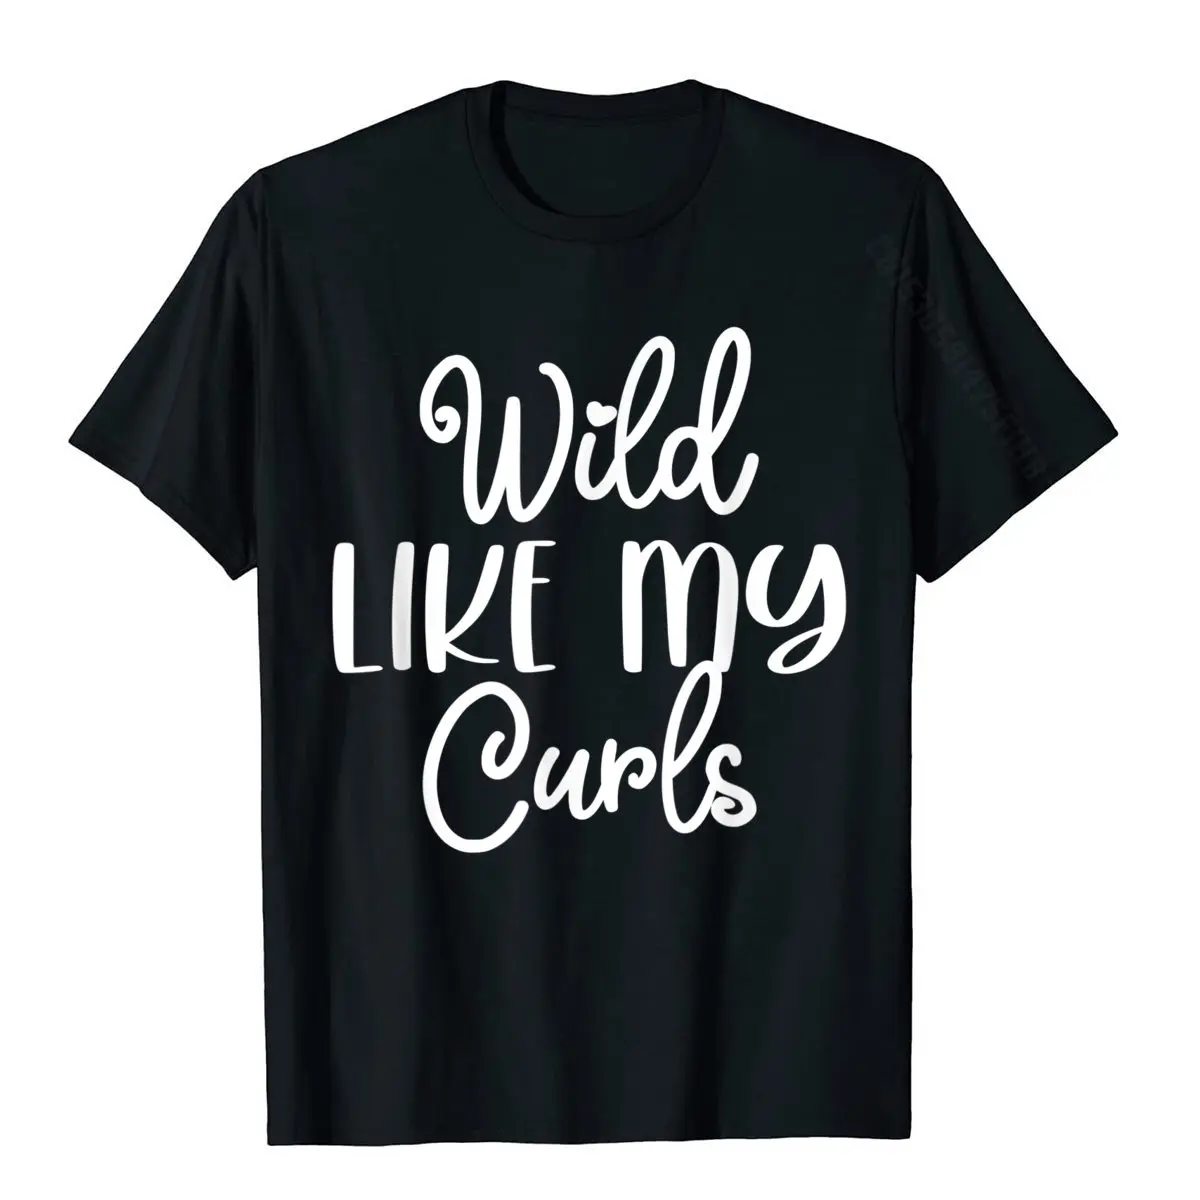 Wild Like My Curls Shirt Funny Curly Haired T-Shirt Family Printed T Shirts Cotton Tops Tees For Adult Casual